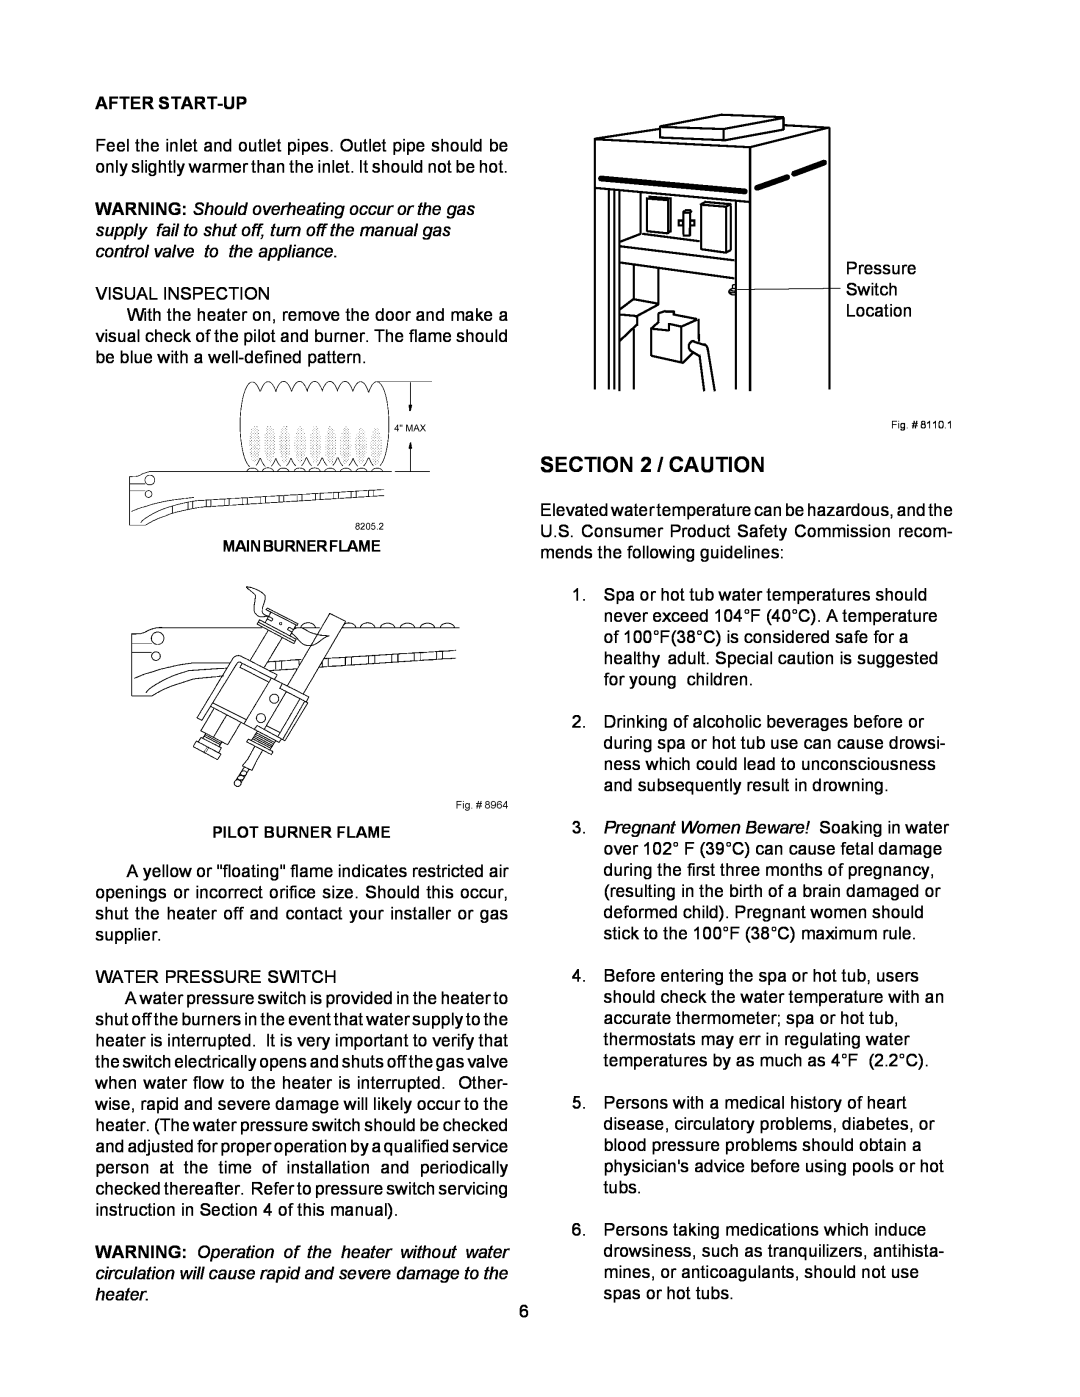 Raypak 155C installation instructions Caution, After Start-Up 